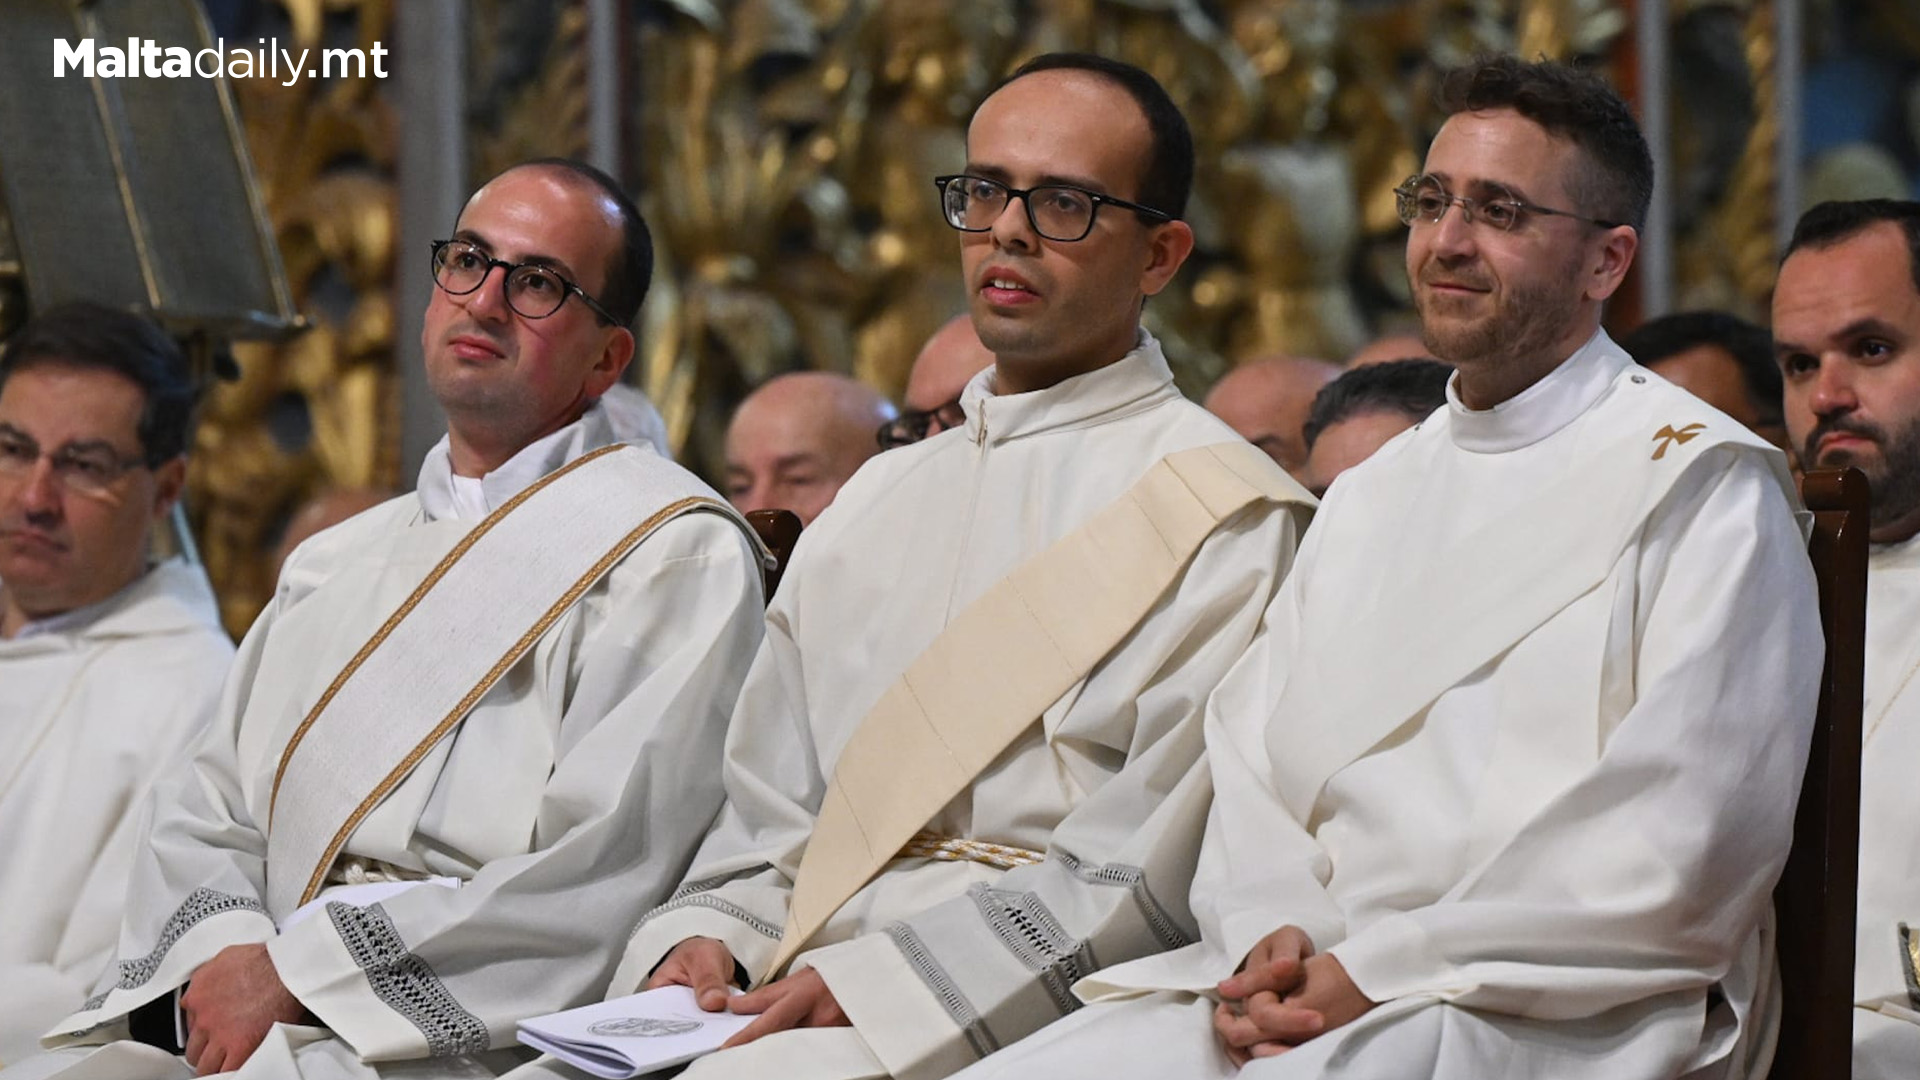 Three Young Men Ordained As New Priests